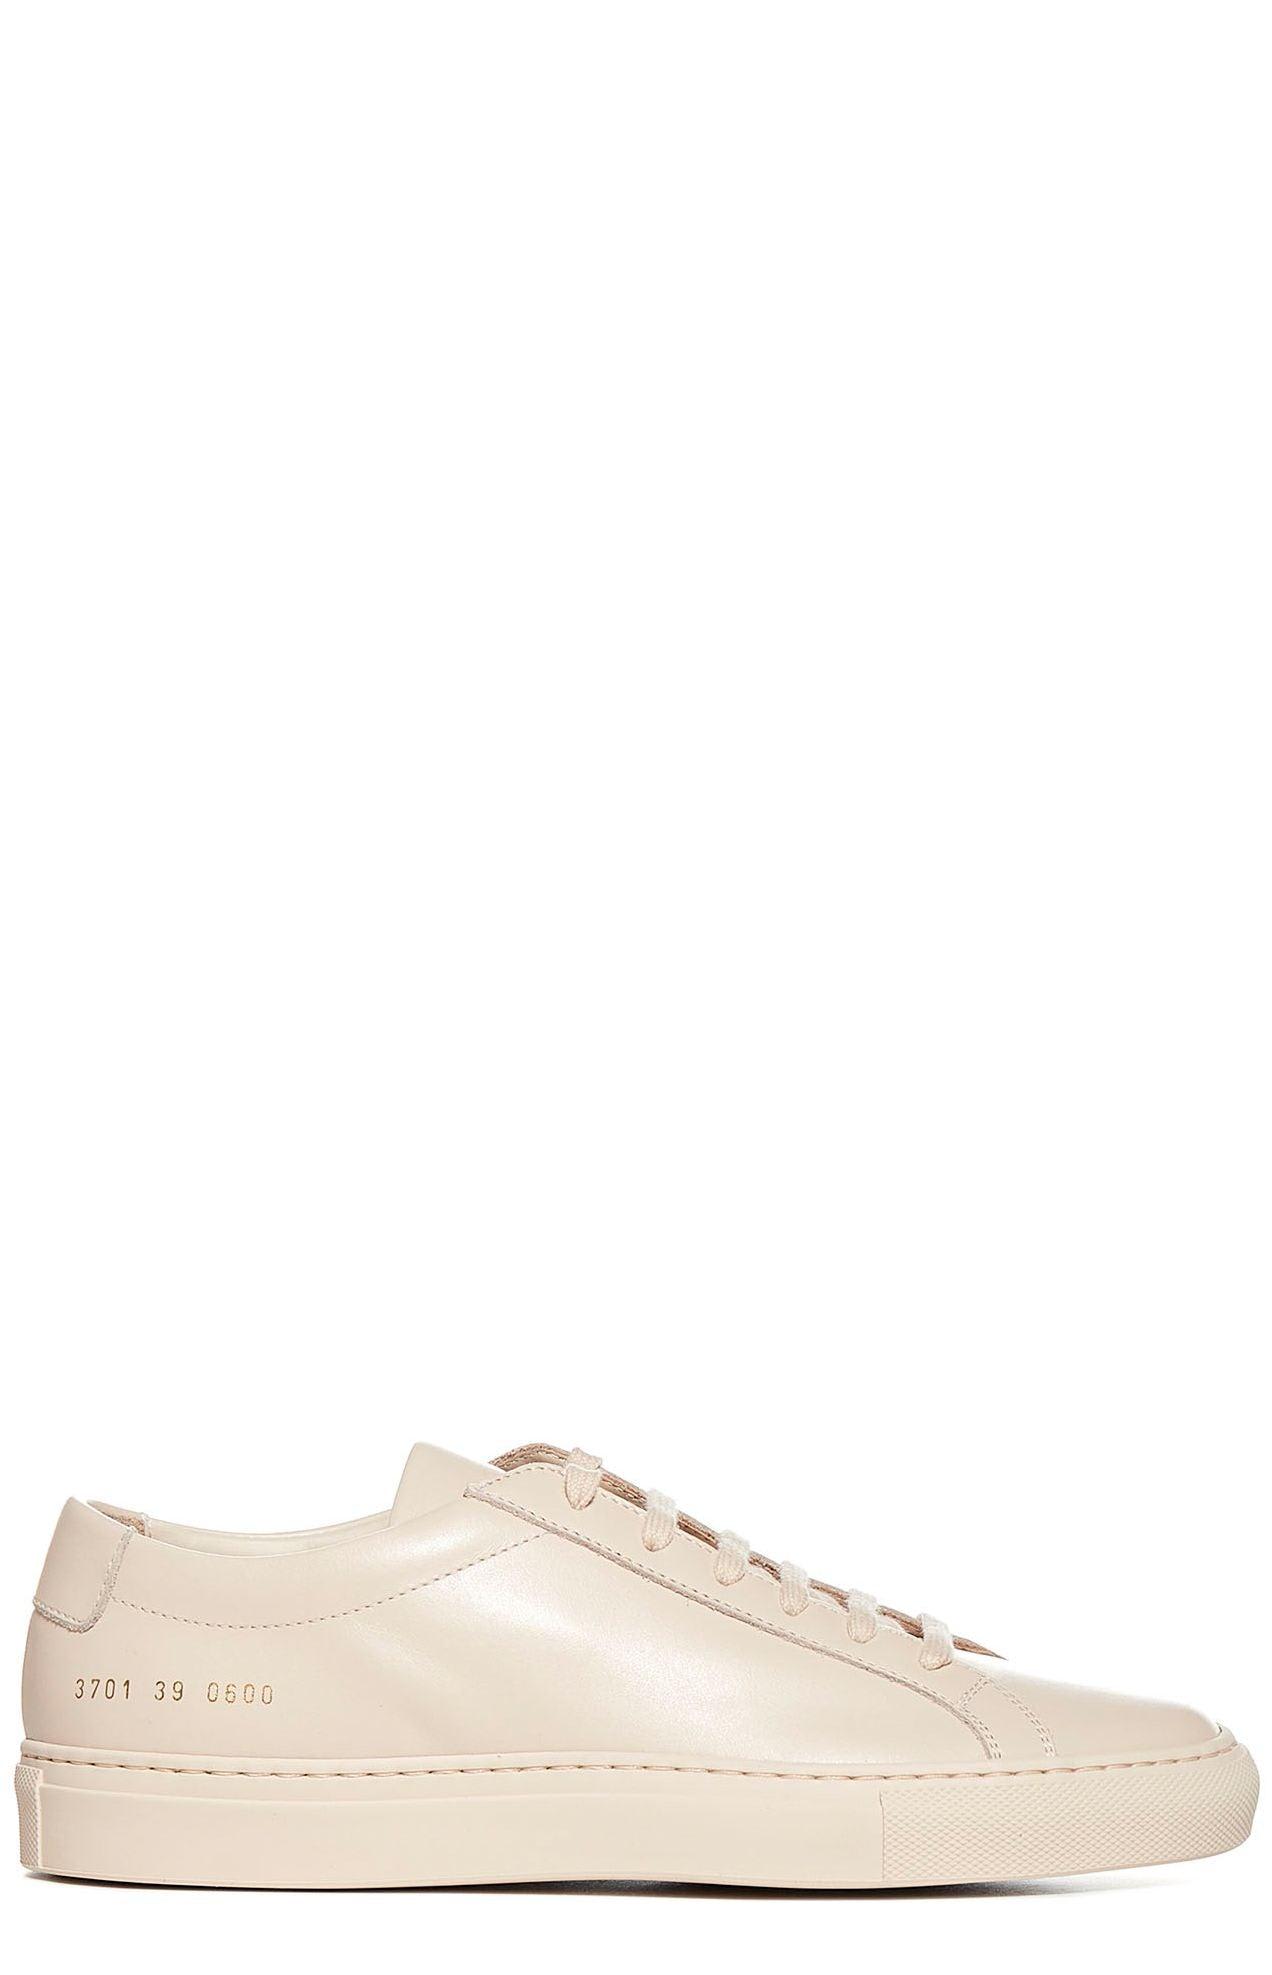 Common Projects Original Achilles Lace-up Sneakers